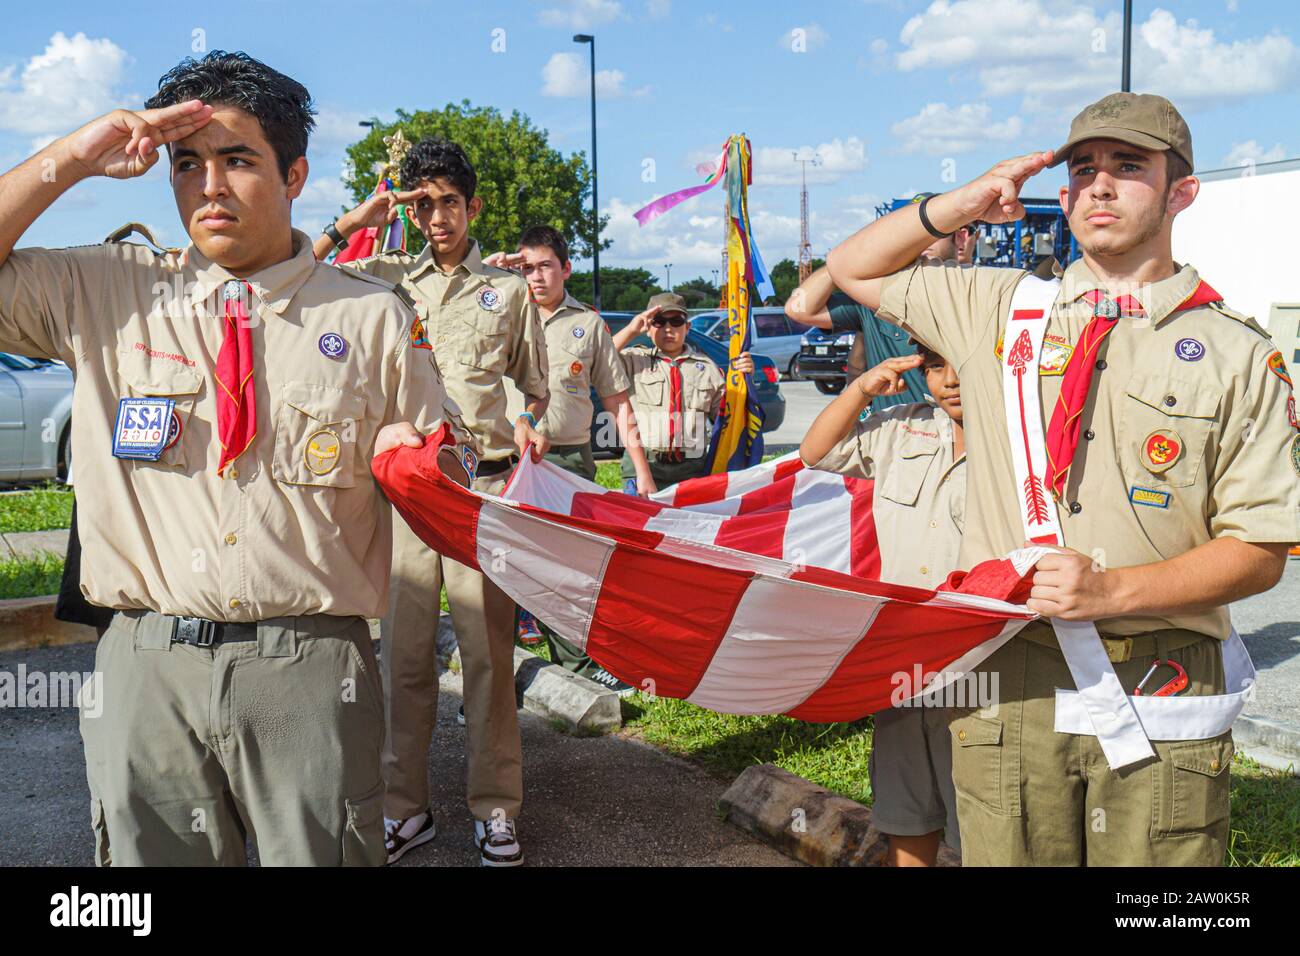 Miami Florida,Arts in the Street,Independence of Central America & Mexico Cultural Integration Day,Hispanic Boy Scout,ragazzo,teen teen teenager Foto Stock